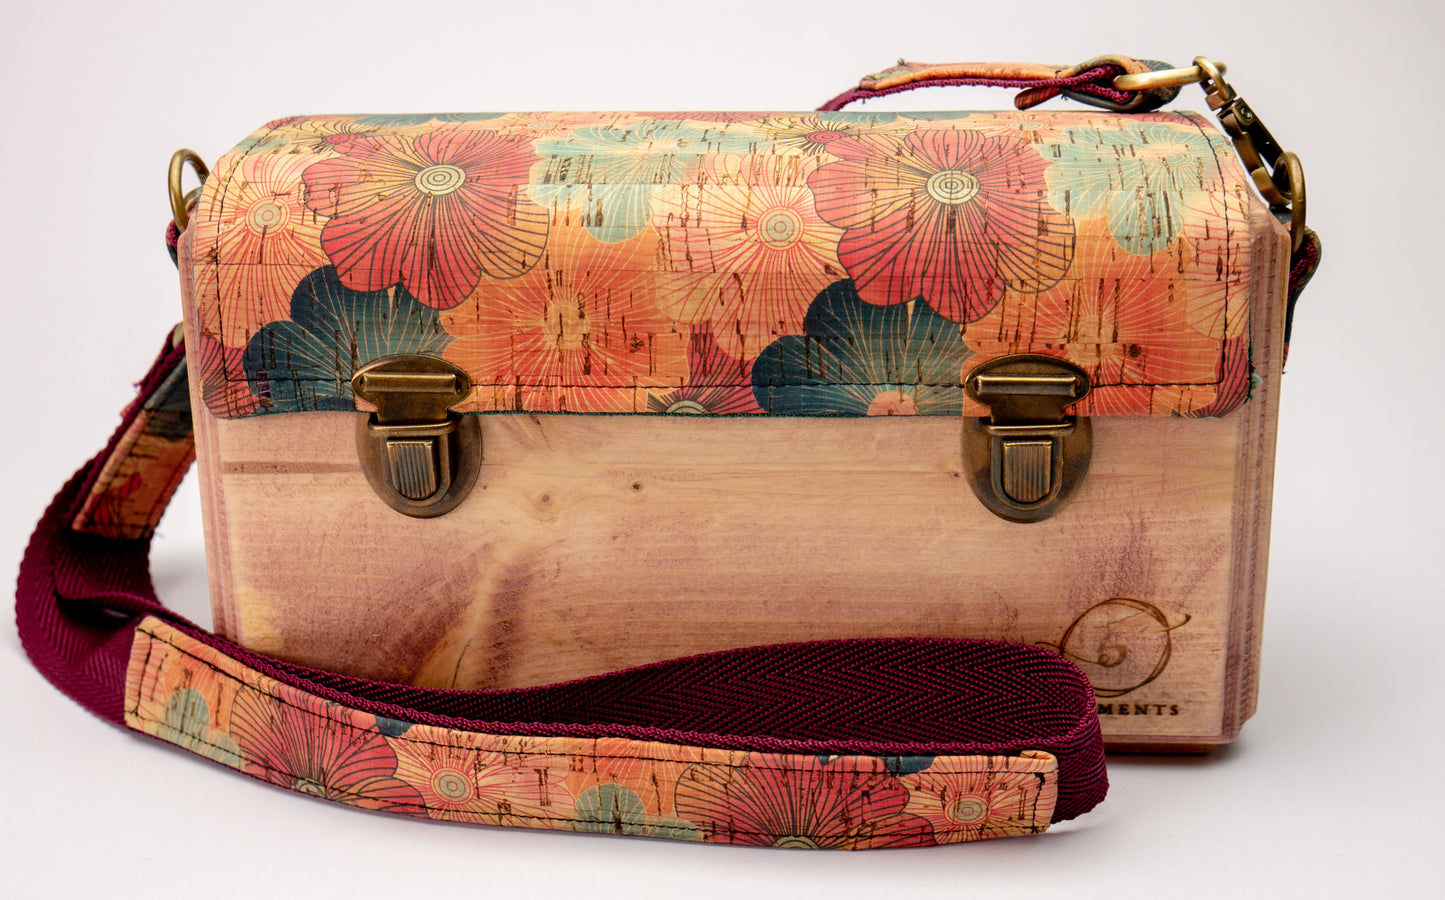 An Eco-Friendly wooden handmade crossbody bag with flower pattern cork leather.